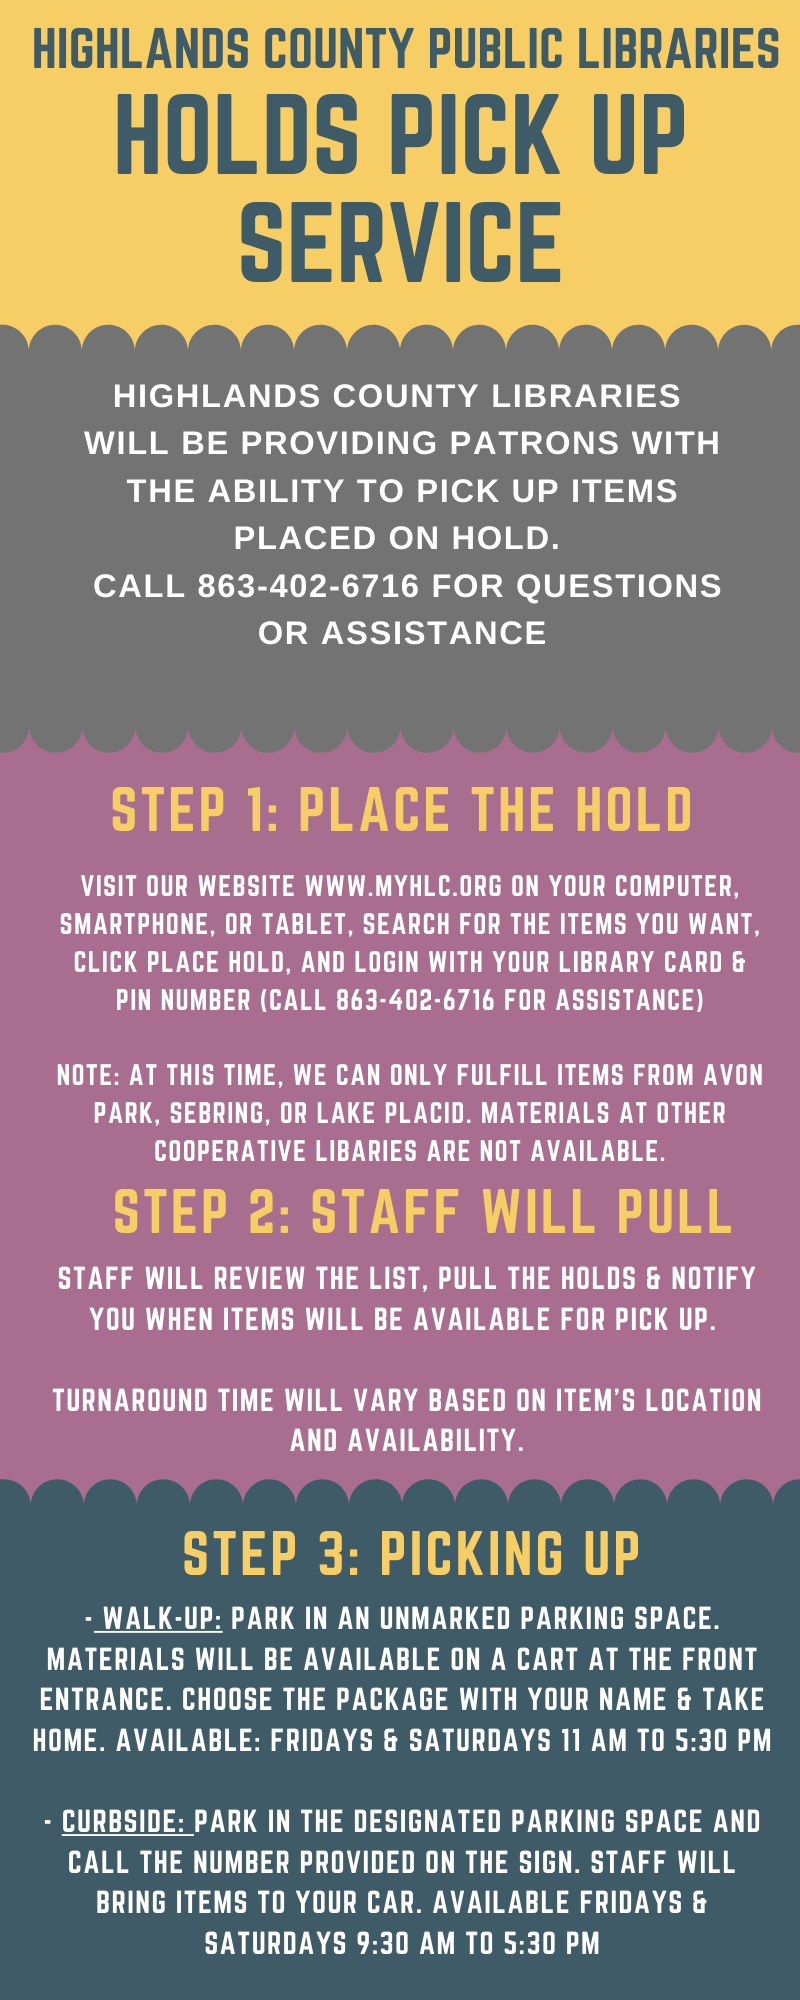 May 1, Highlands County Library System will be launching a holds pick up service for Avon Park Public Library, Lake Placid Memorial Library, and Sebring Public Library. From the comfort of your home, place desired items on hold. Staff will notify you when item(s) become available for pick up. Park in an unmarked space at the library and materials will be waiting by the entrance, checked out and marked with your name. Service is available Fridays and Saturdays 11 AM to 5:30 PM. For questions or to place holds over the phone, call 863-402-6716.